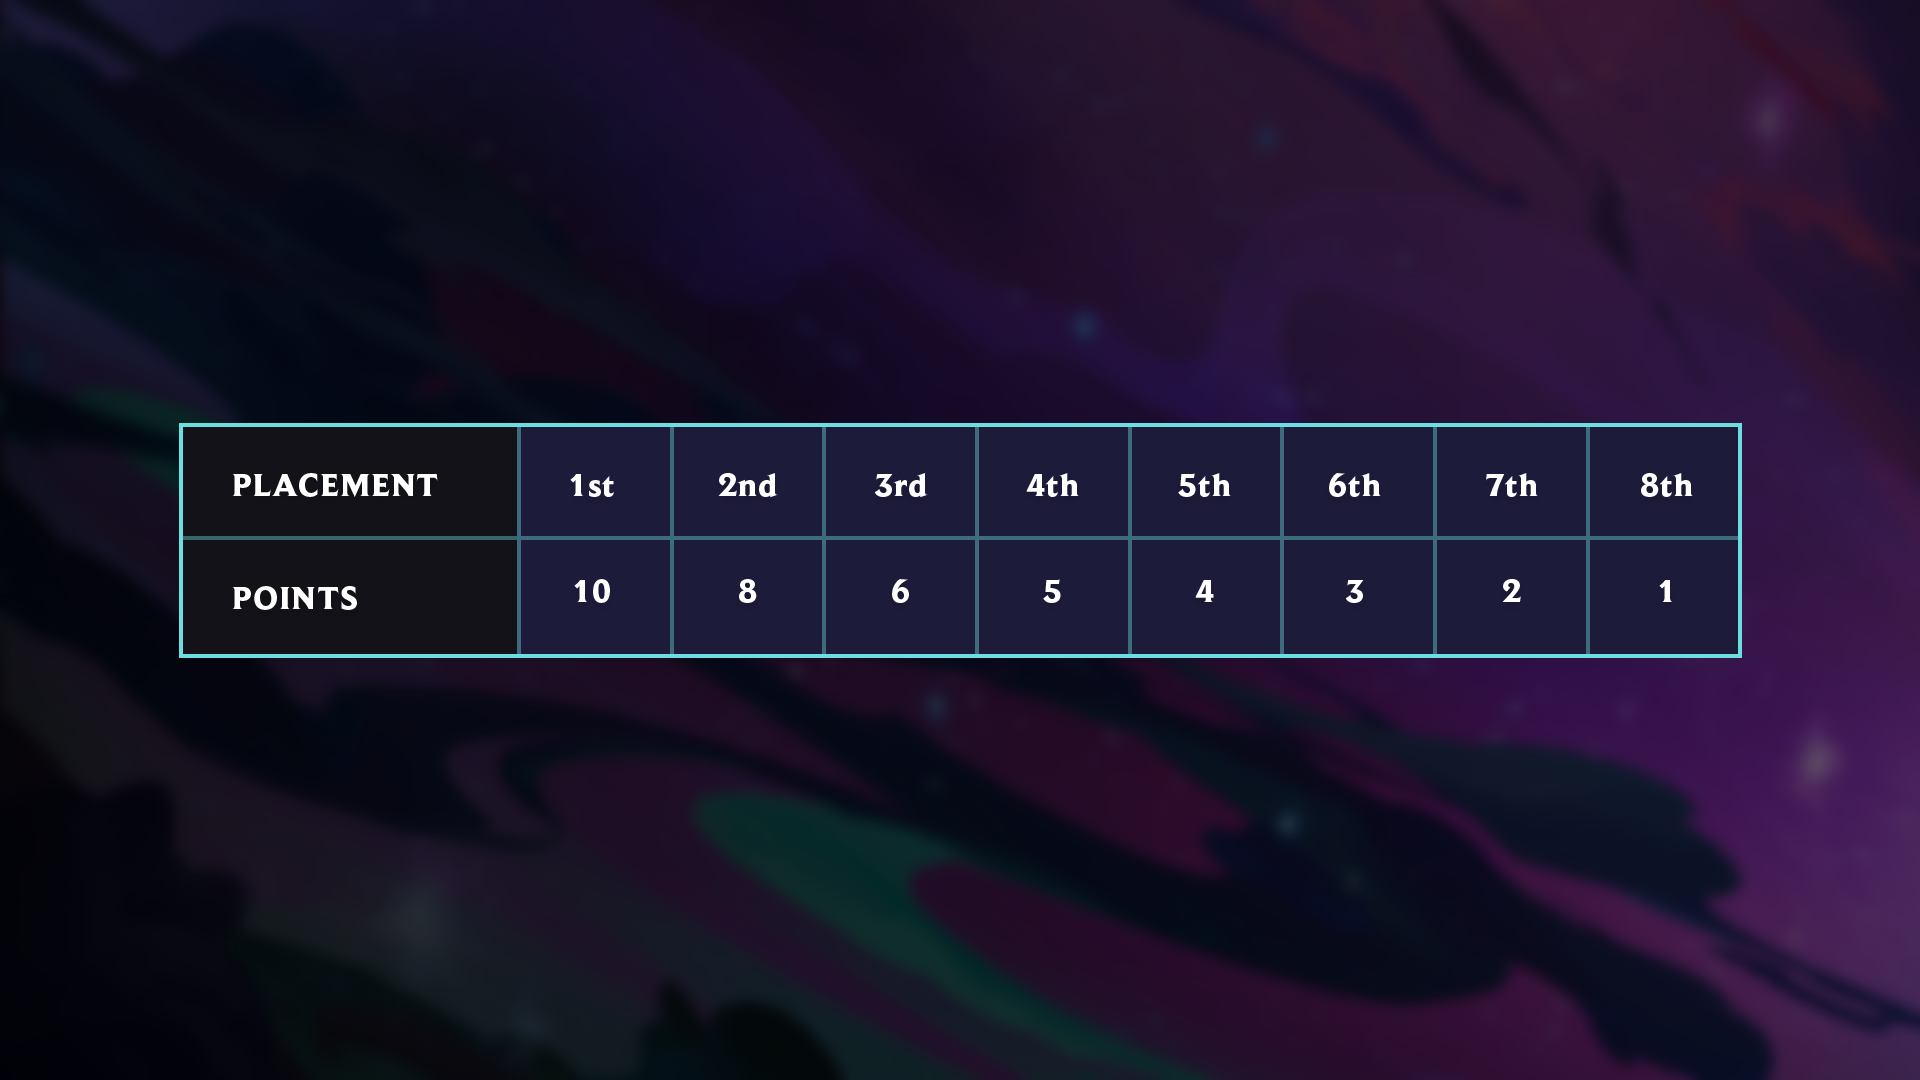 TFT_Galaxies_PlacementPointChart.png